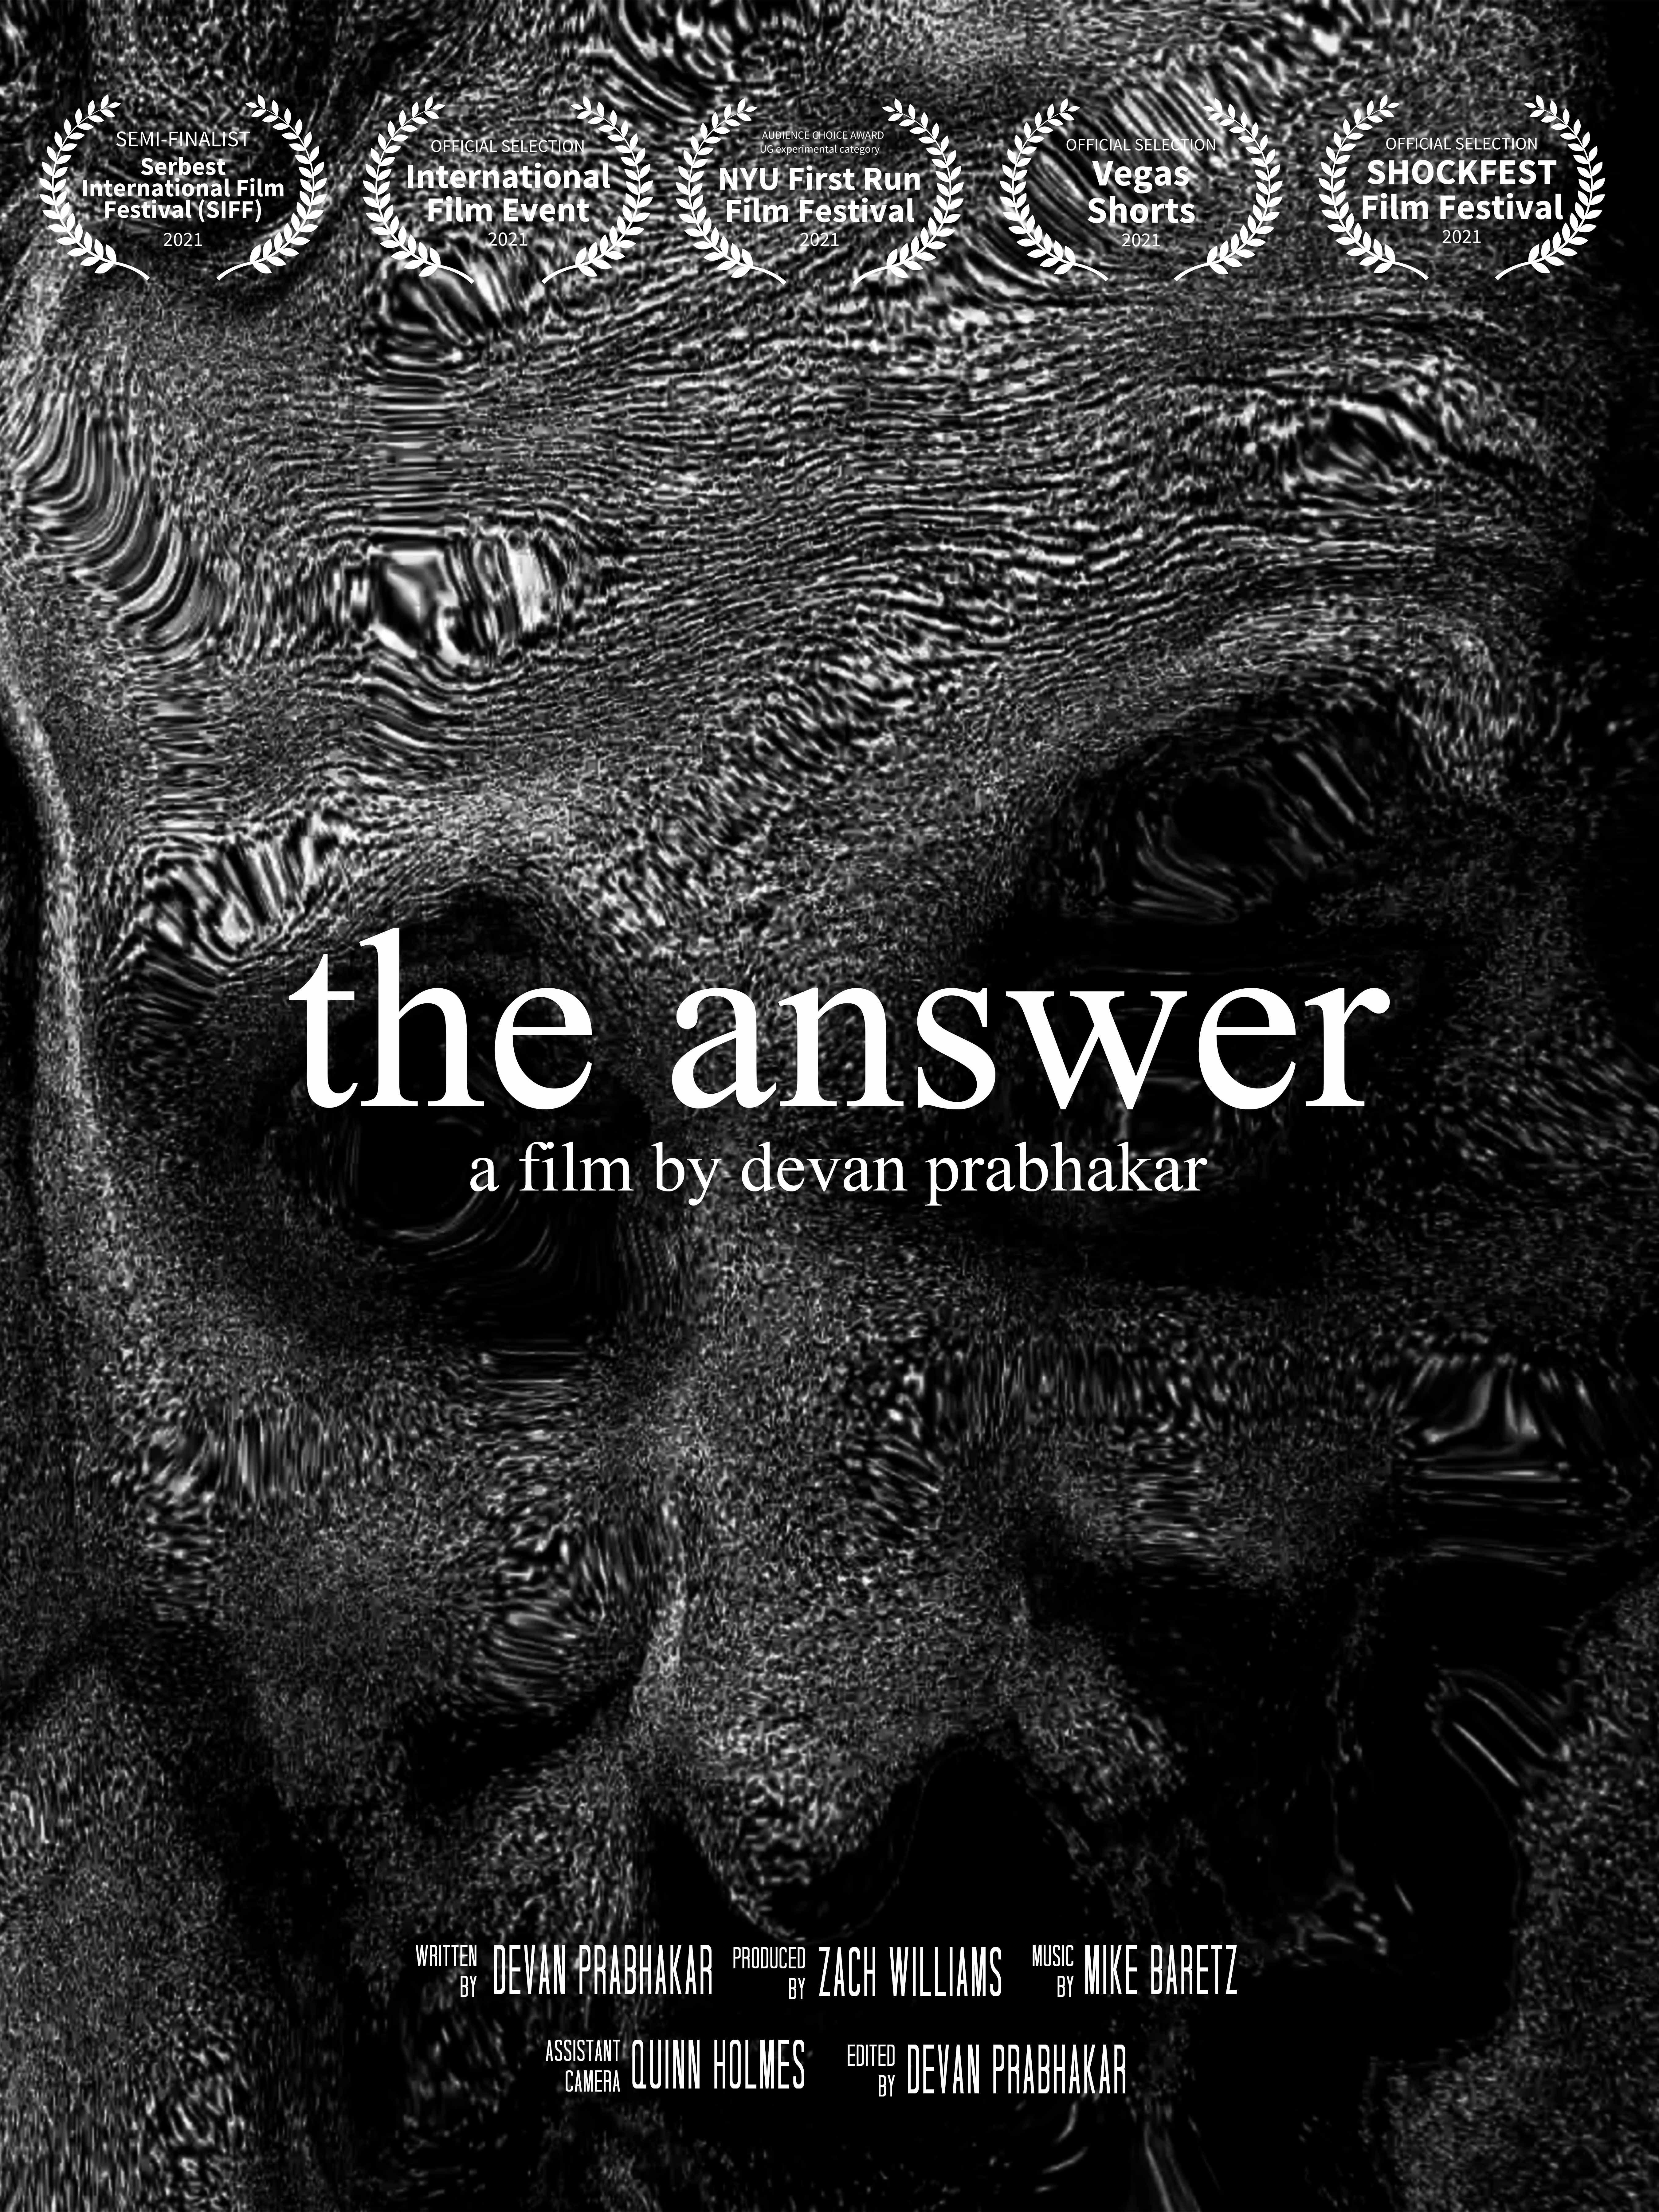 The answer